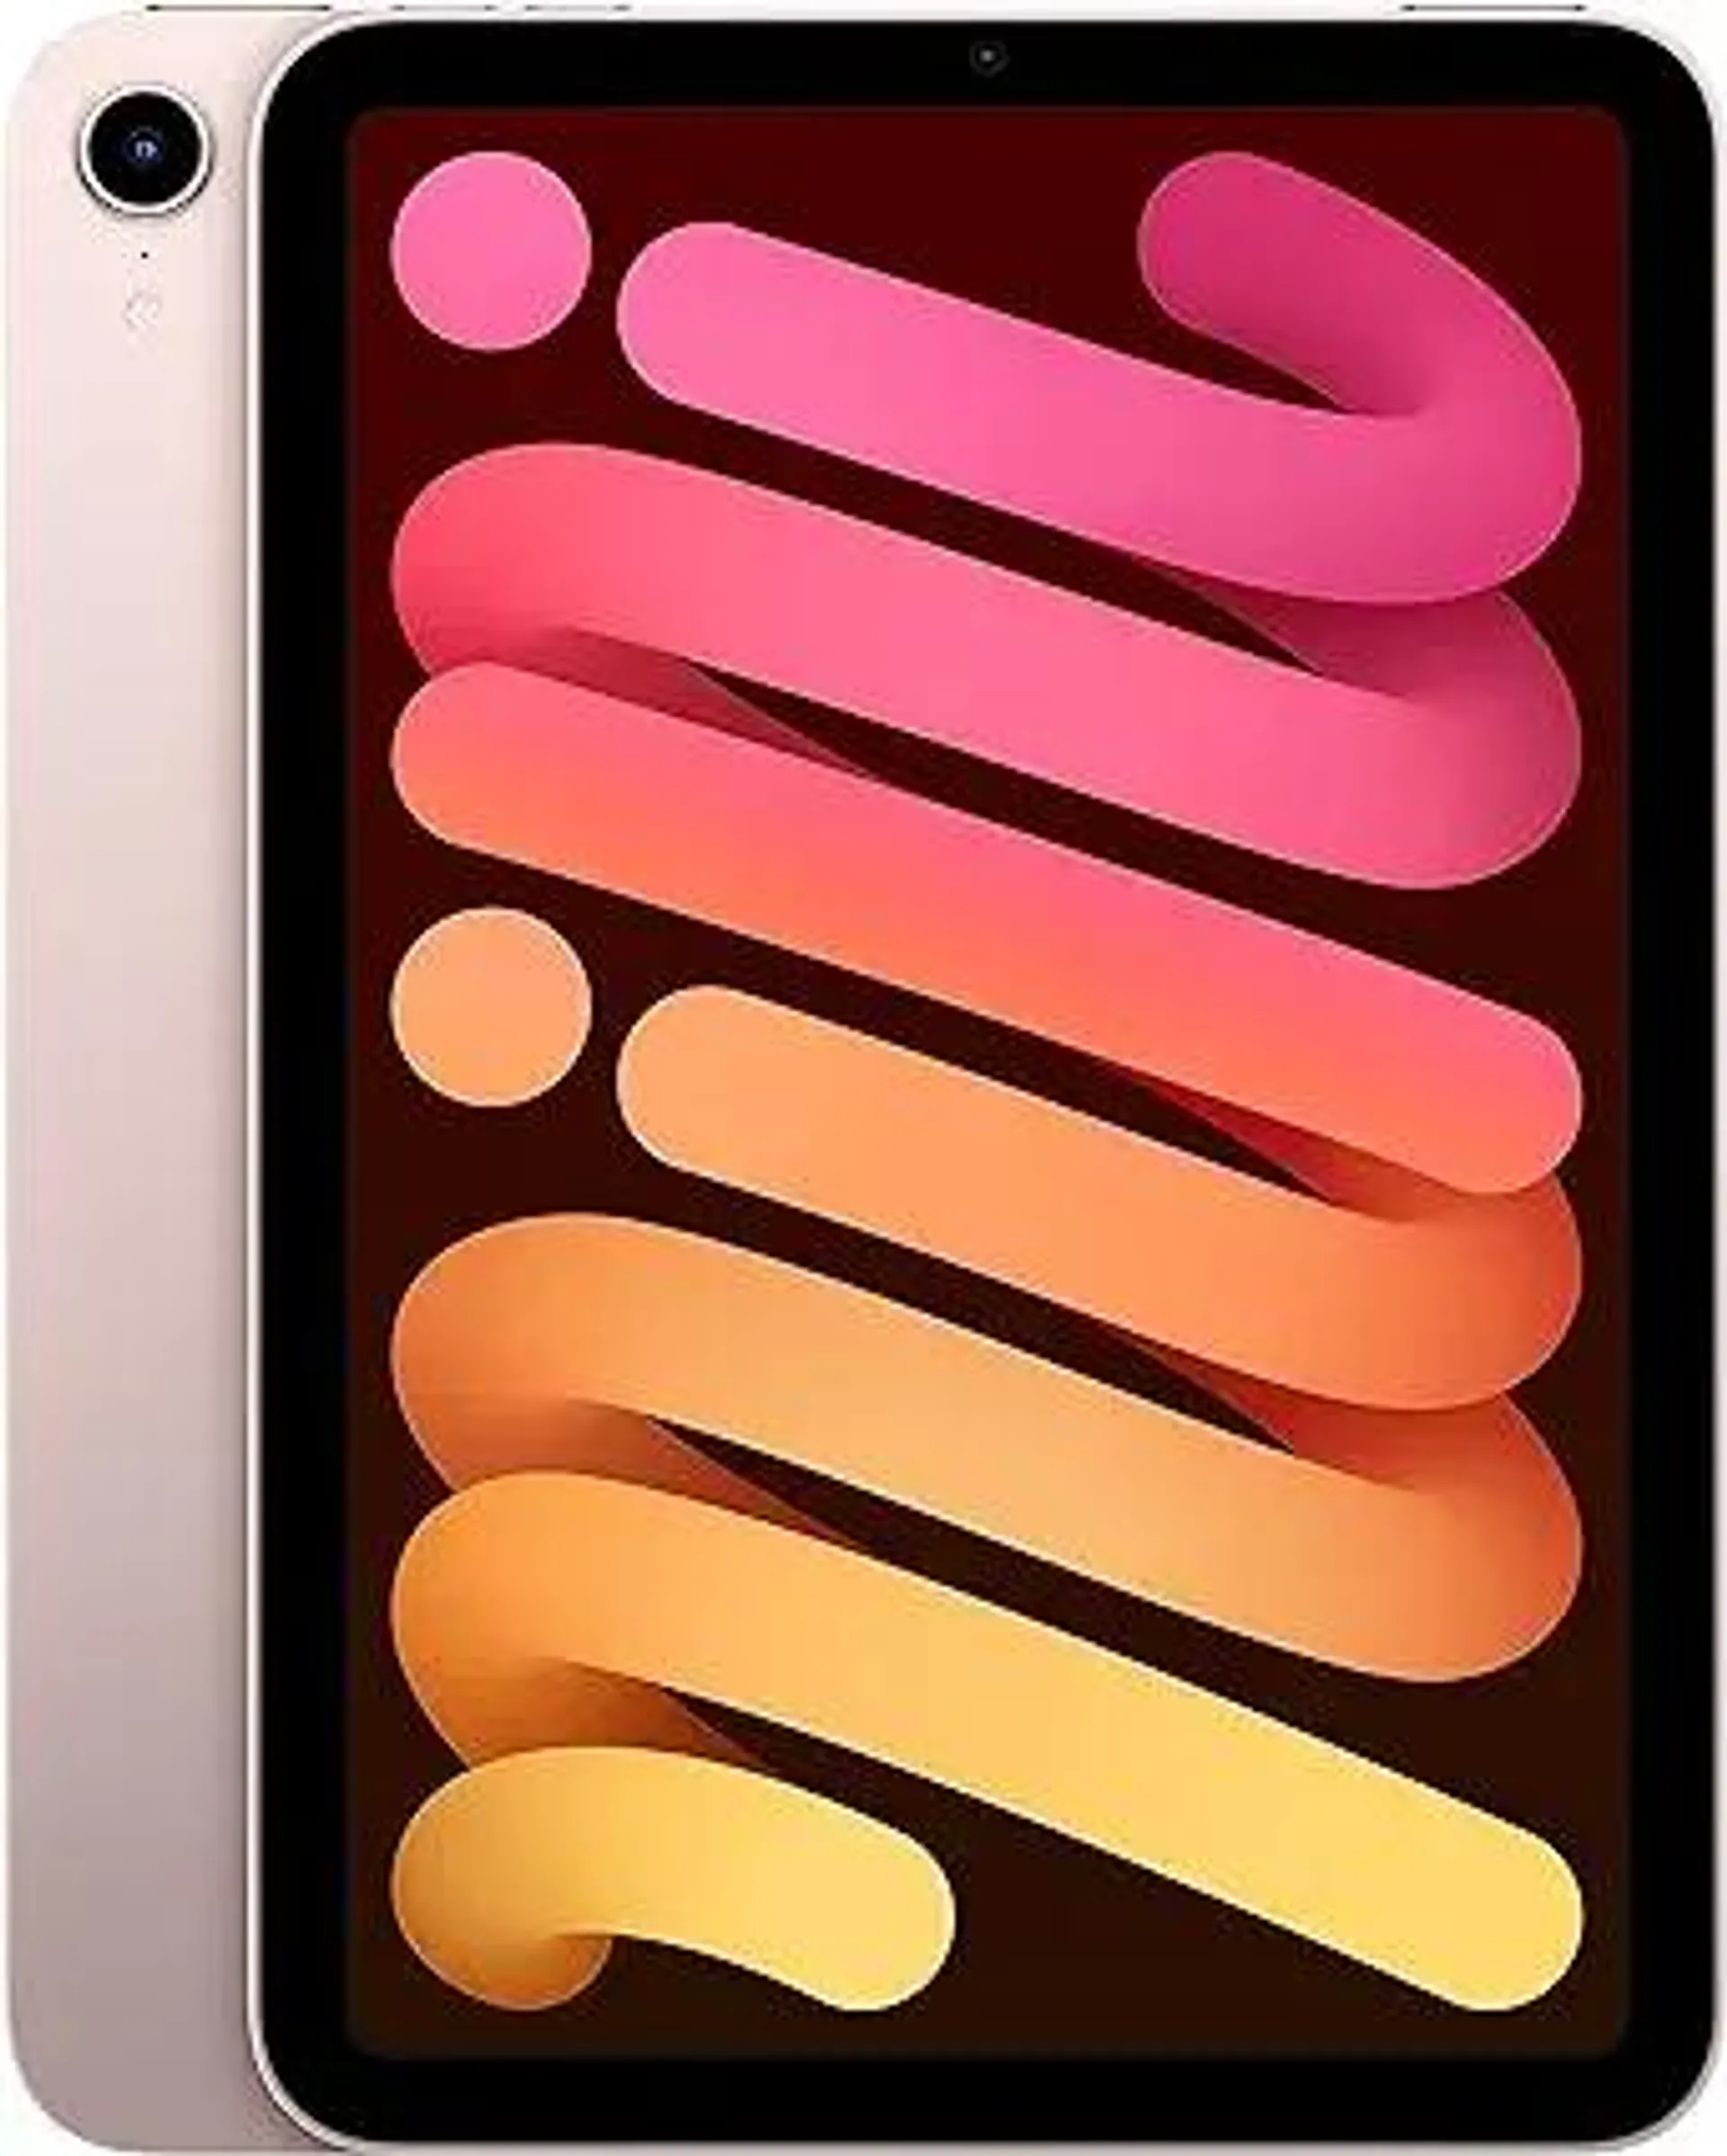 Apple iPad Mini (6th Generation): with A15 Bionic chip, 8.3-inch Liquid Retina Display, 64GB, Wi-Fi 6, 12MP front/12MP Back Camera, Touch ID, All-Day Battery Life – Pink